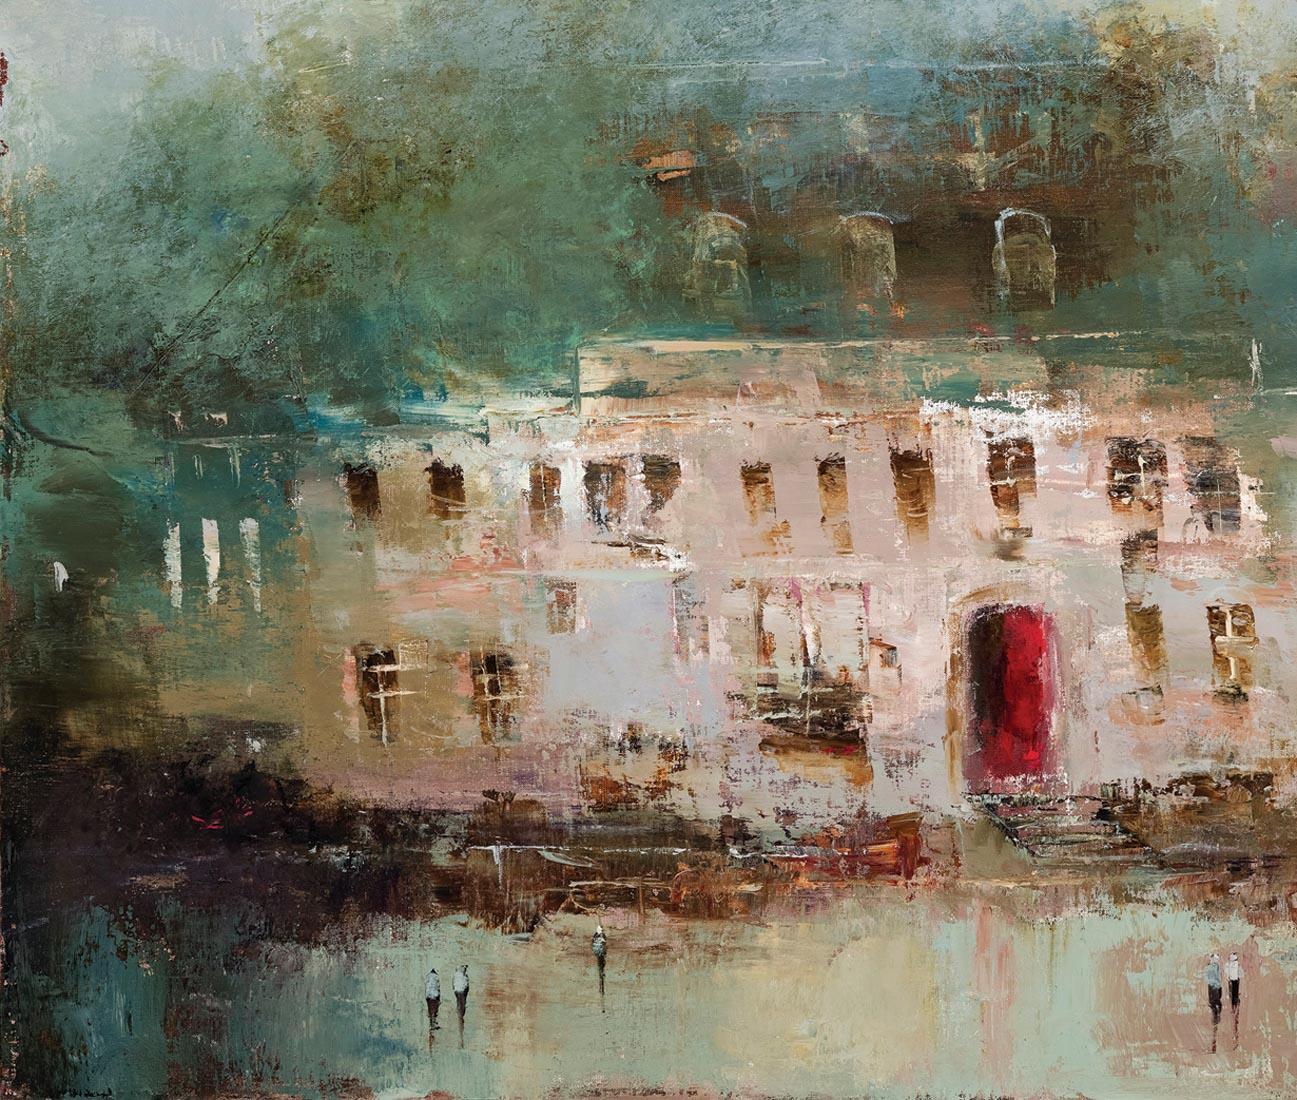 To See the Summer Sky is Poetry - Impressionist Painting by France Jodoin